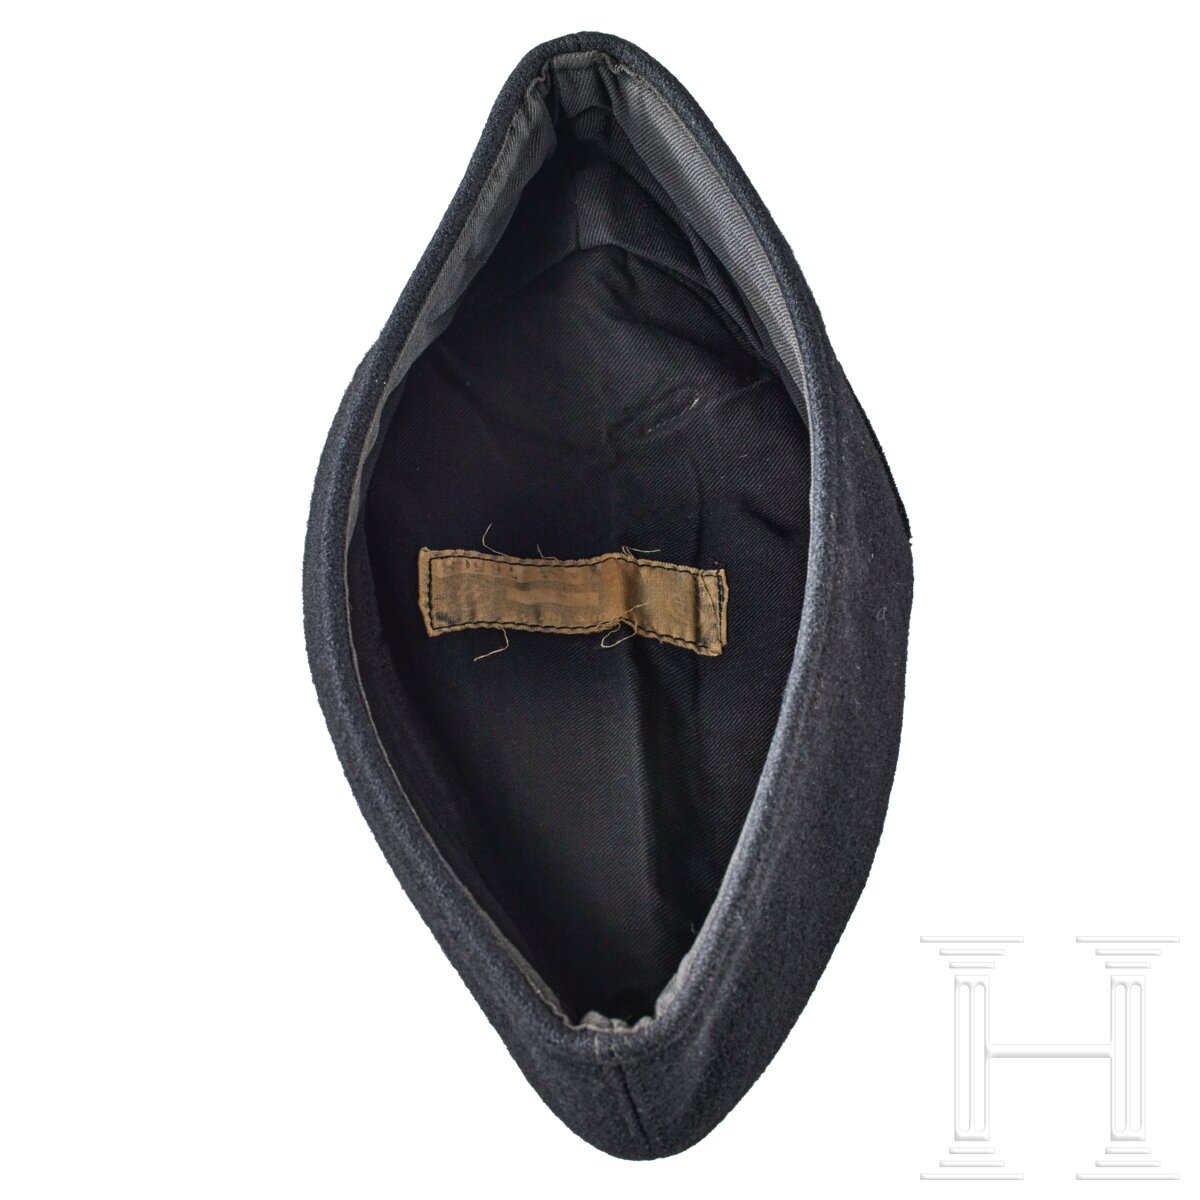 A Field Cap for Allgemeine SS Enlisted/NCO - Image 7 of 11